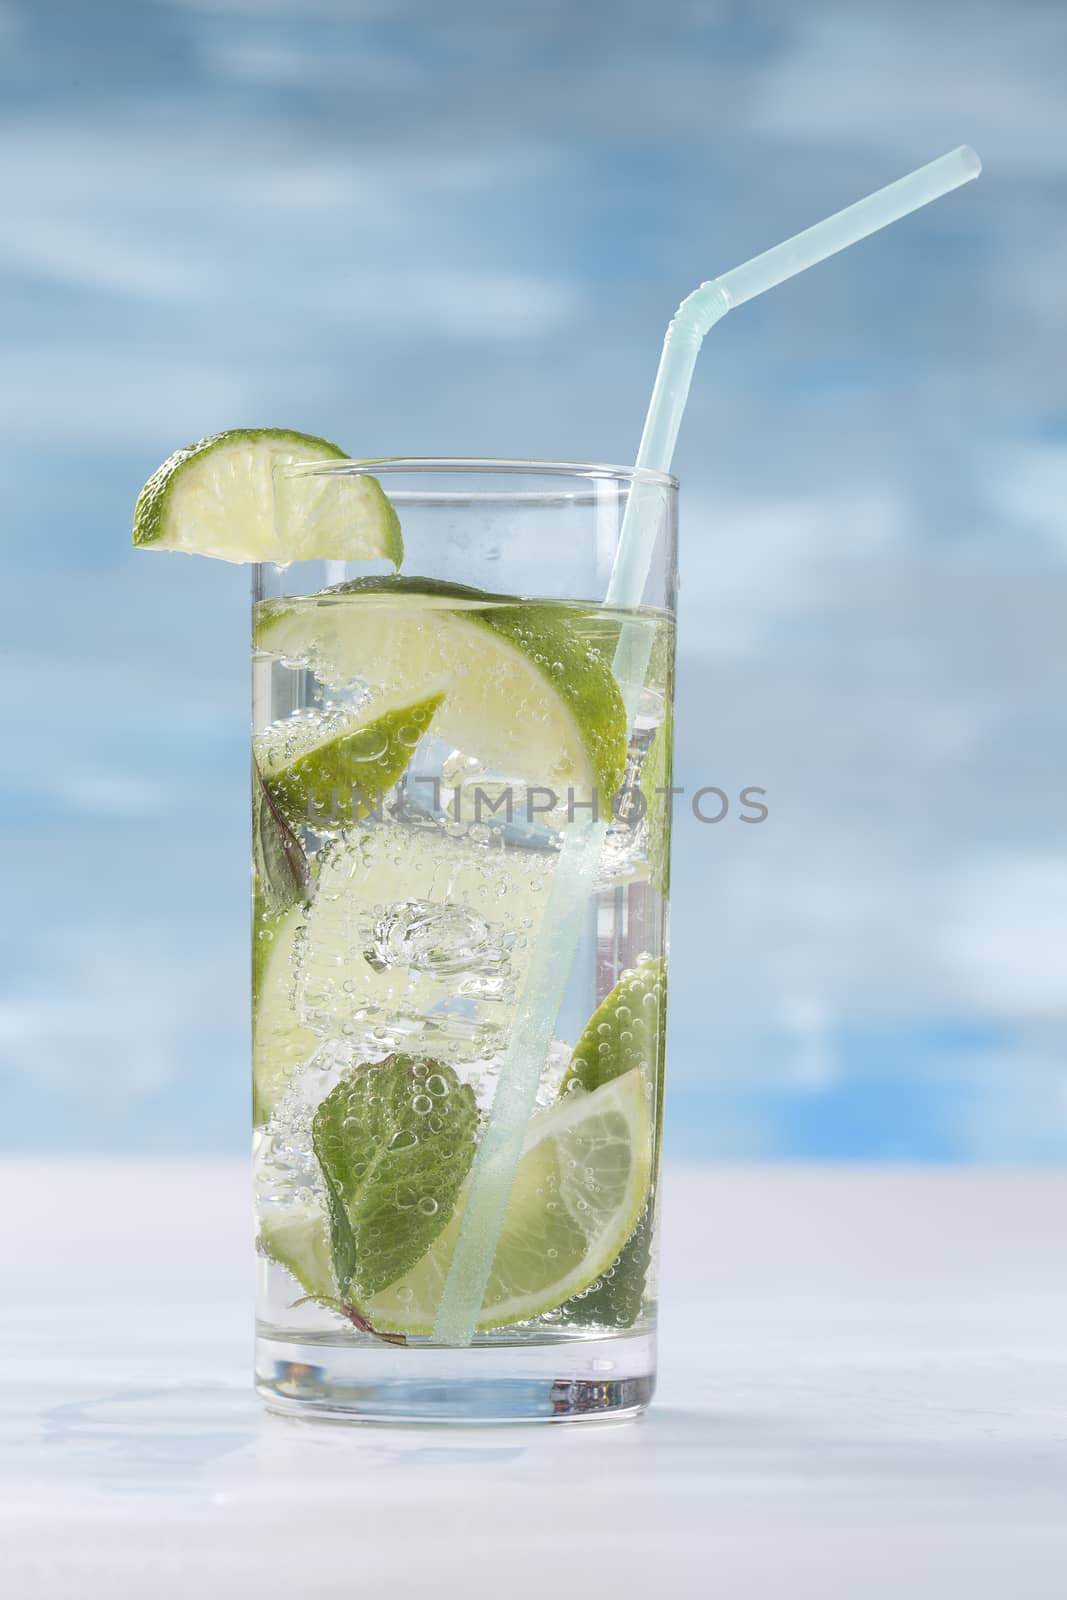 Glass of sparkling water with ice cubes garnished with a slice of lime and mint on blue sky background